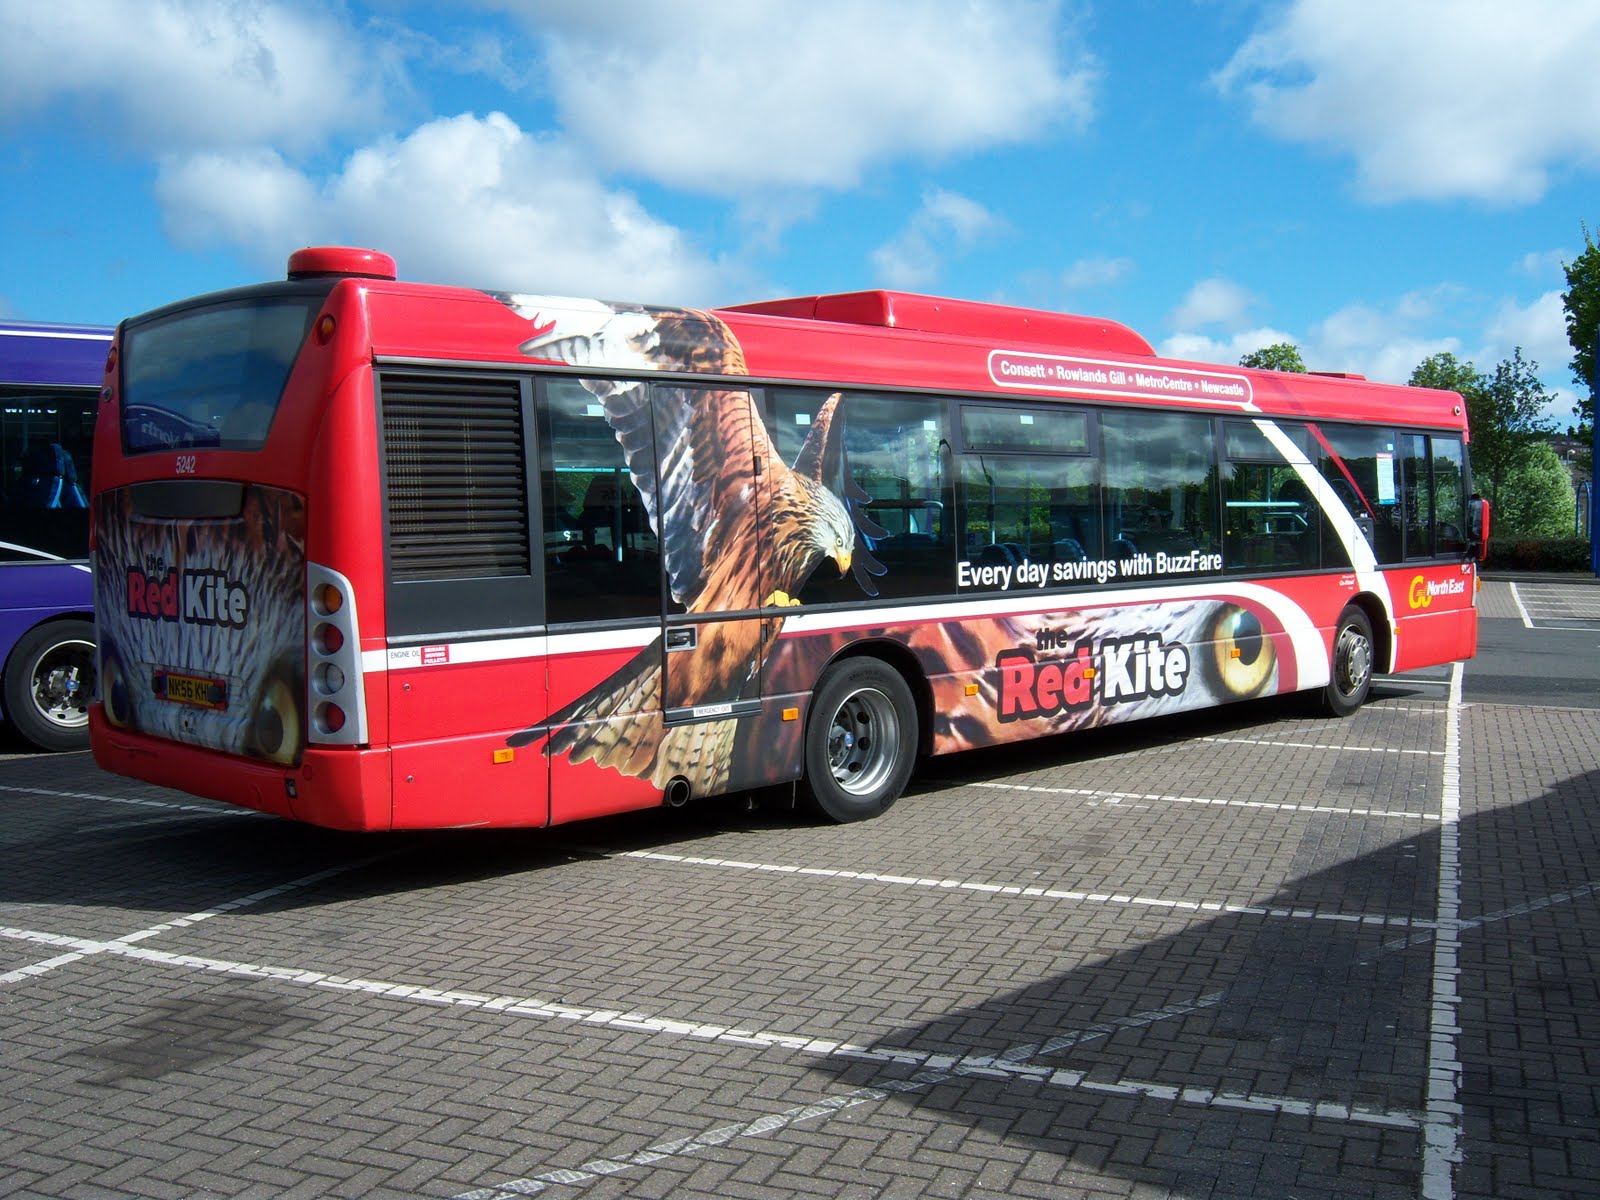 [Go_North_East_bus_5242_Scania_CN230_Omnicity_NK56_KHL_The_Red_Kite_livery_Metrocentre_rally_2009_pic_4.JPG.jpeg]